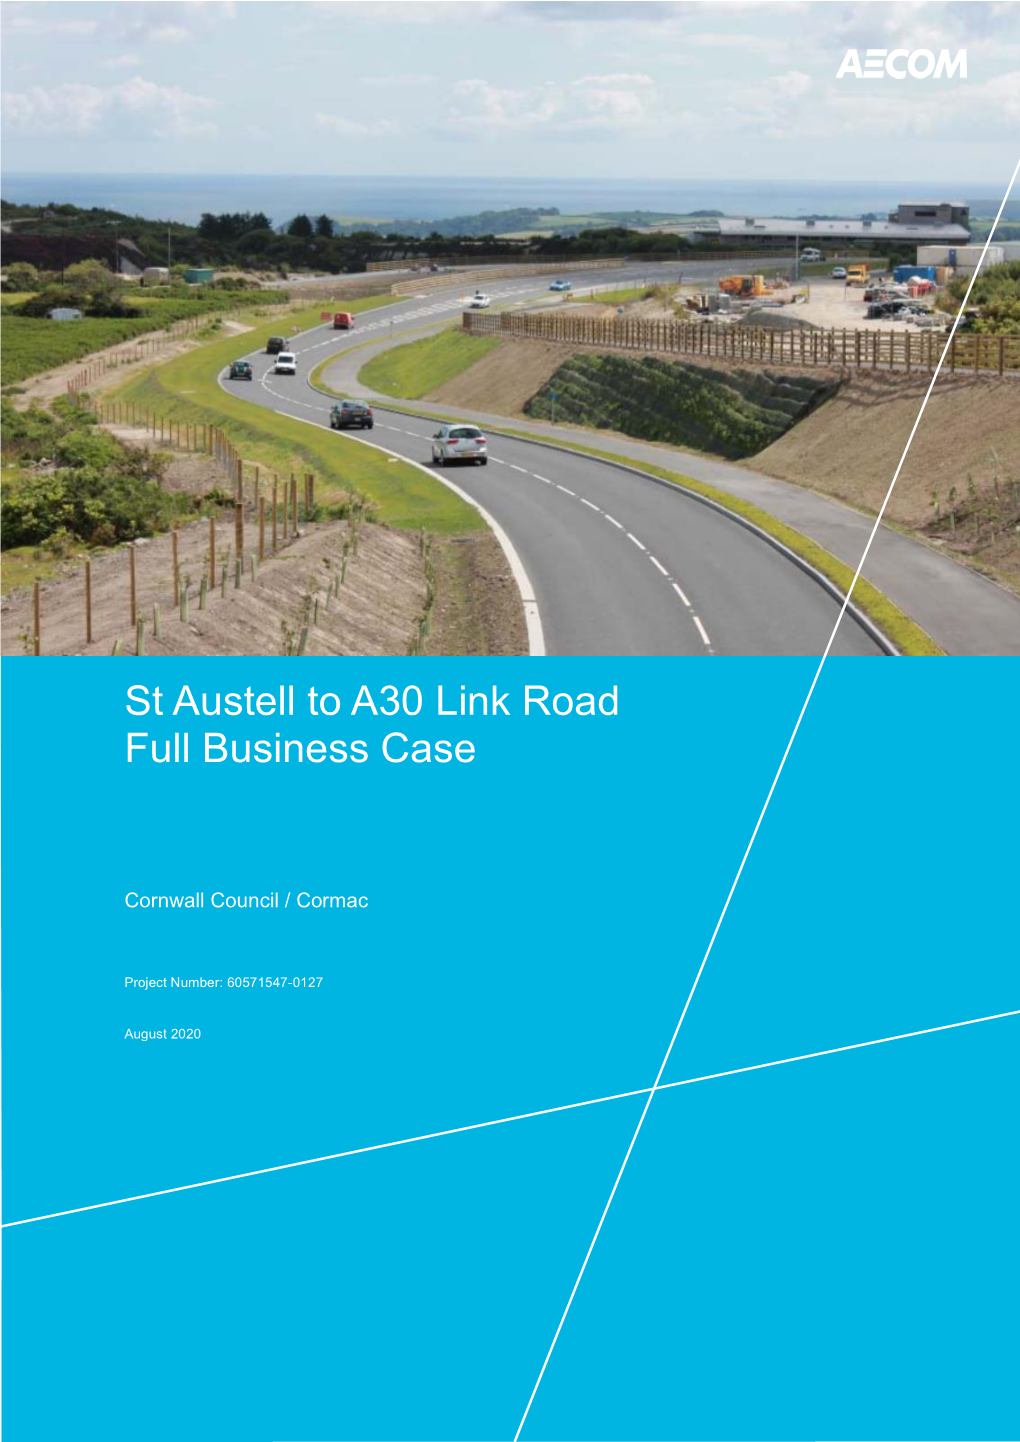 St Austell to A30 Link Road Full Business Case